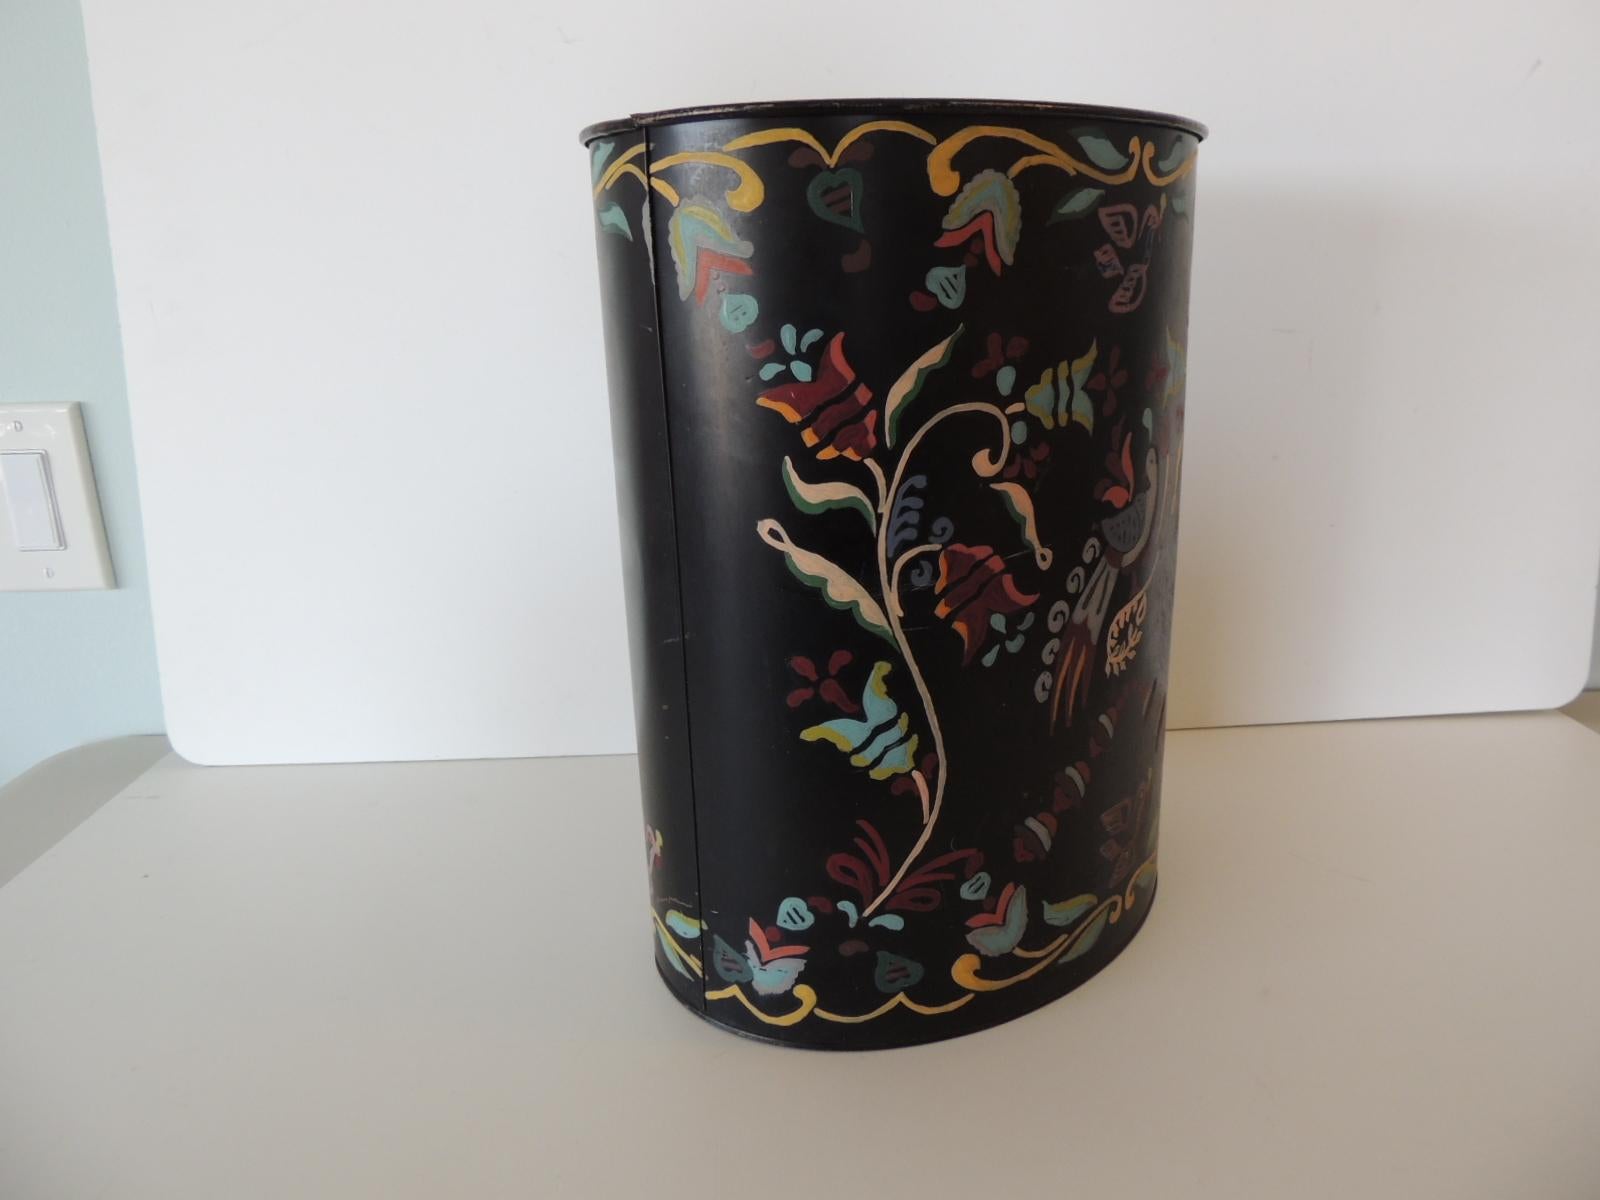 Vintage Folk Art style painted tin oval wastebasket
in black with pastel colors.
Size: 11.5